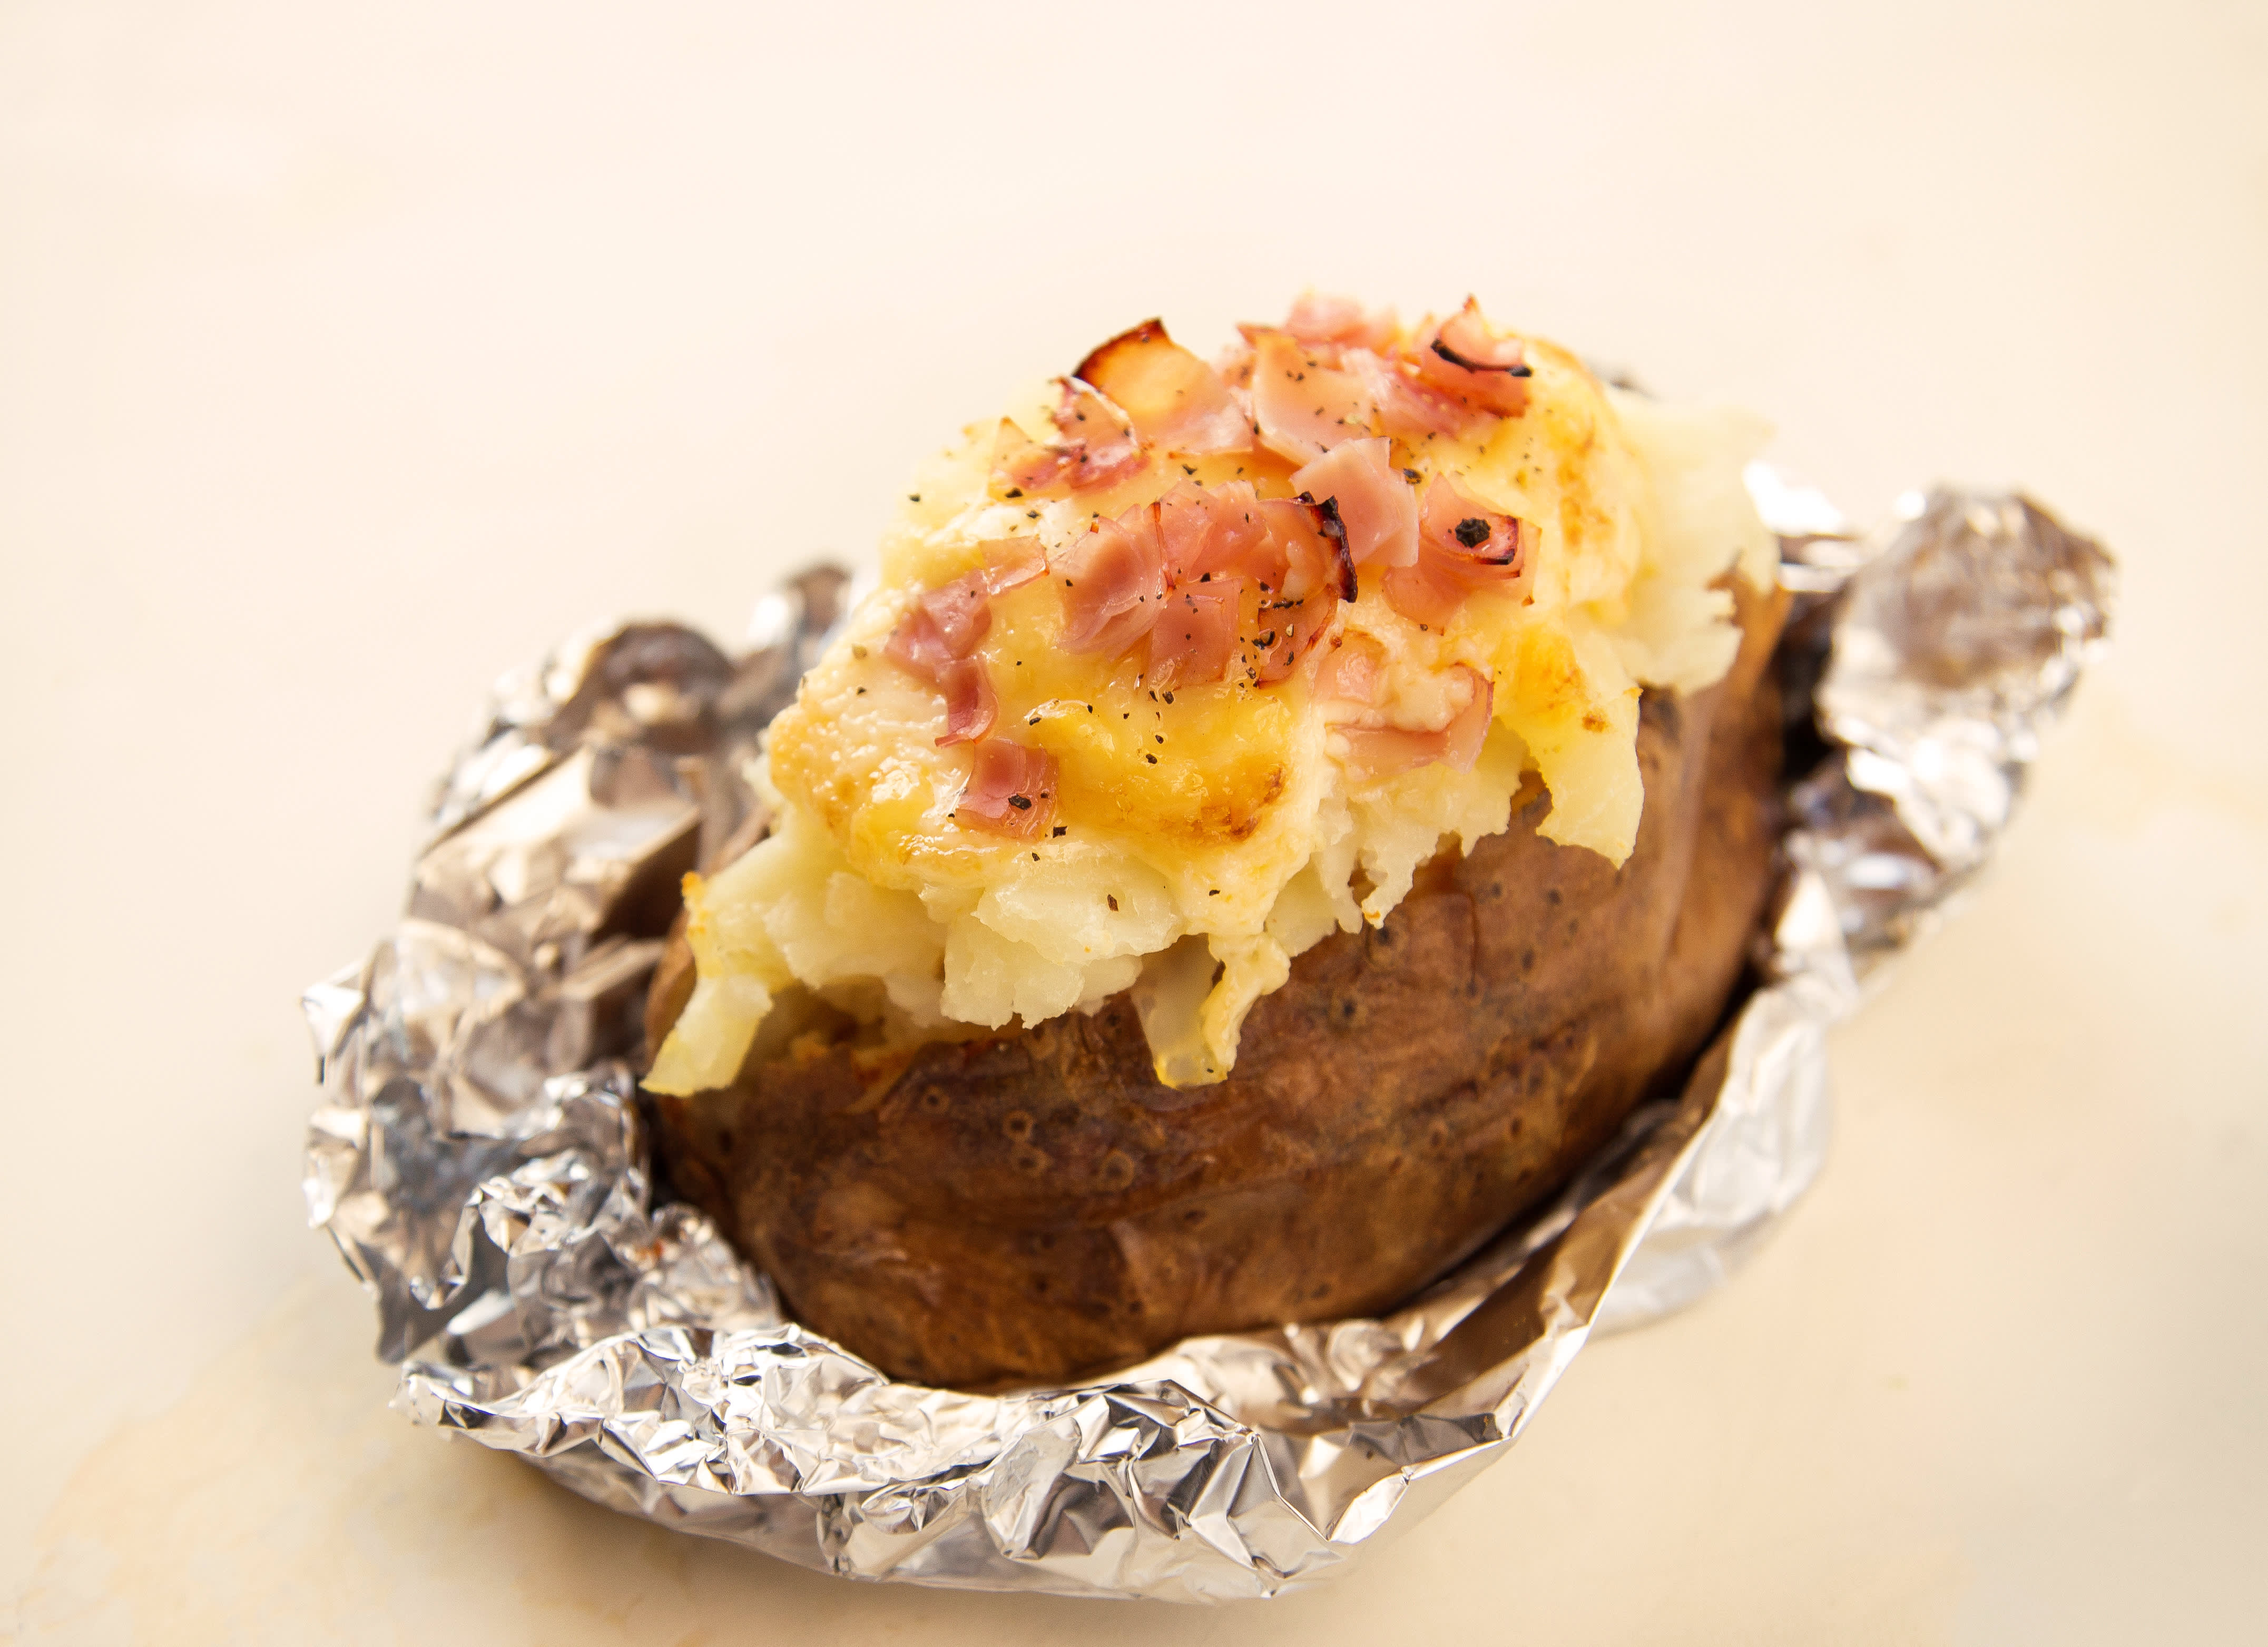 Baked potatoes in Milan are synonym with Gialle & Co - Pantografo Magazine